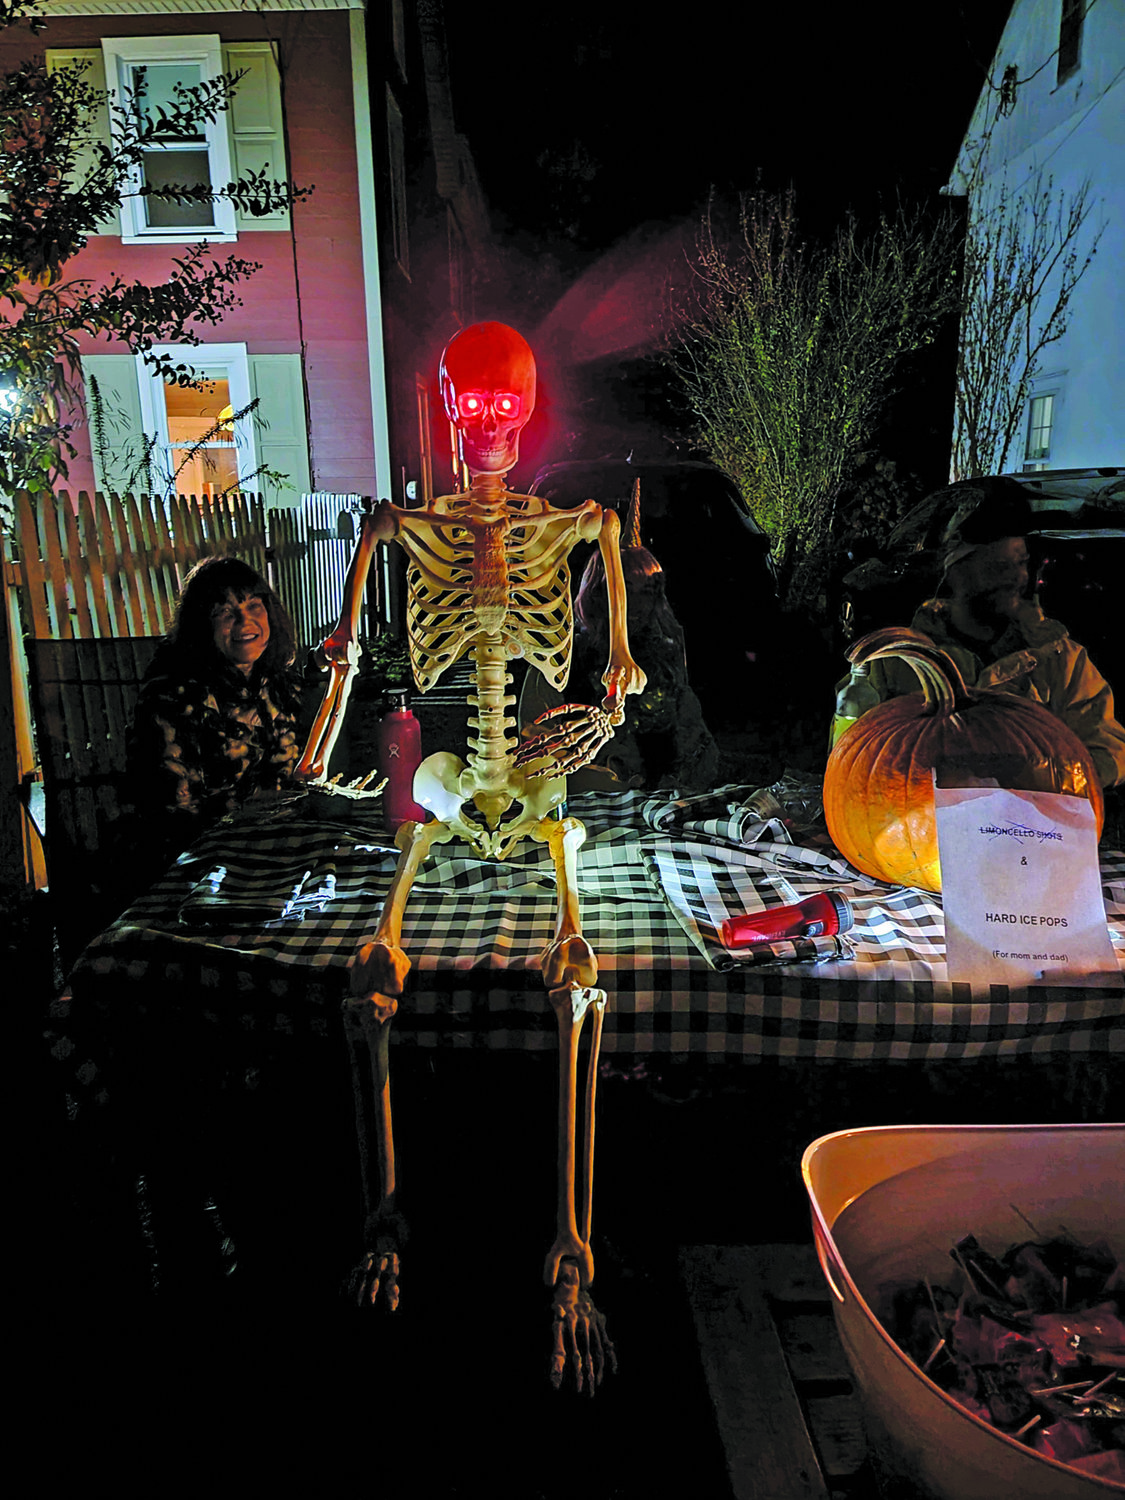 A home display along the canal for Canal-O-Ween 2021.